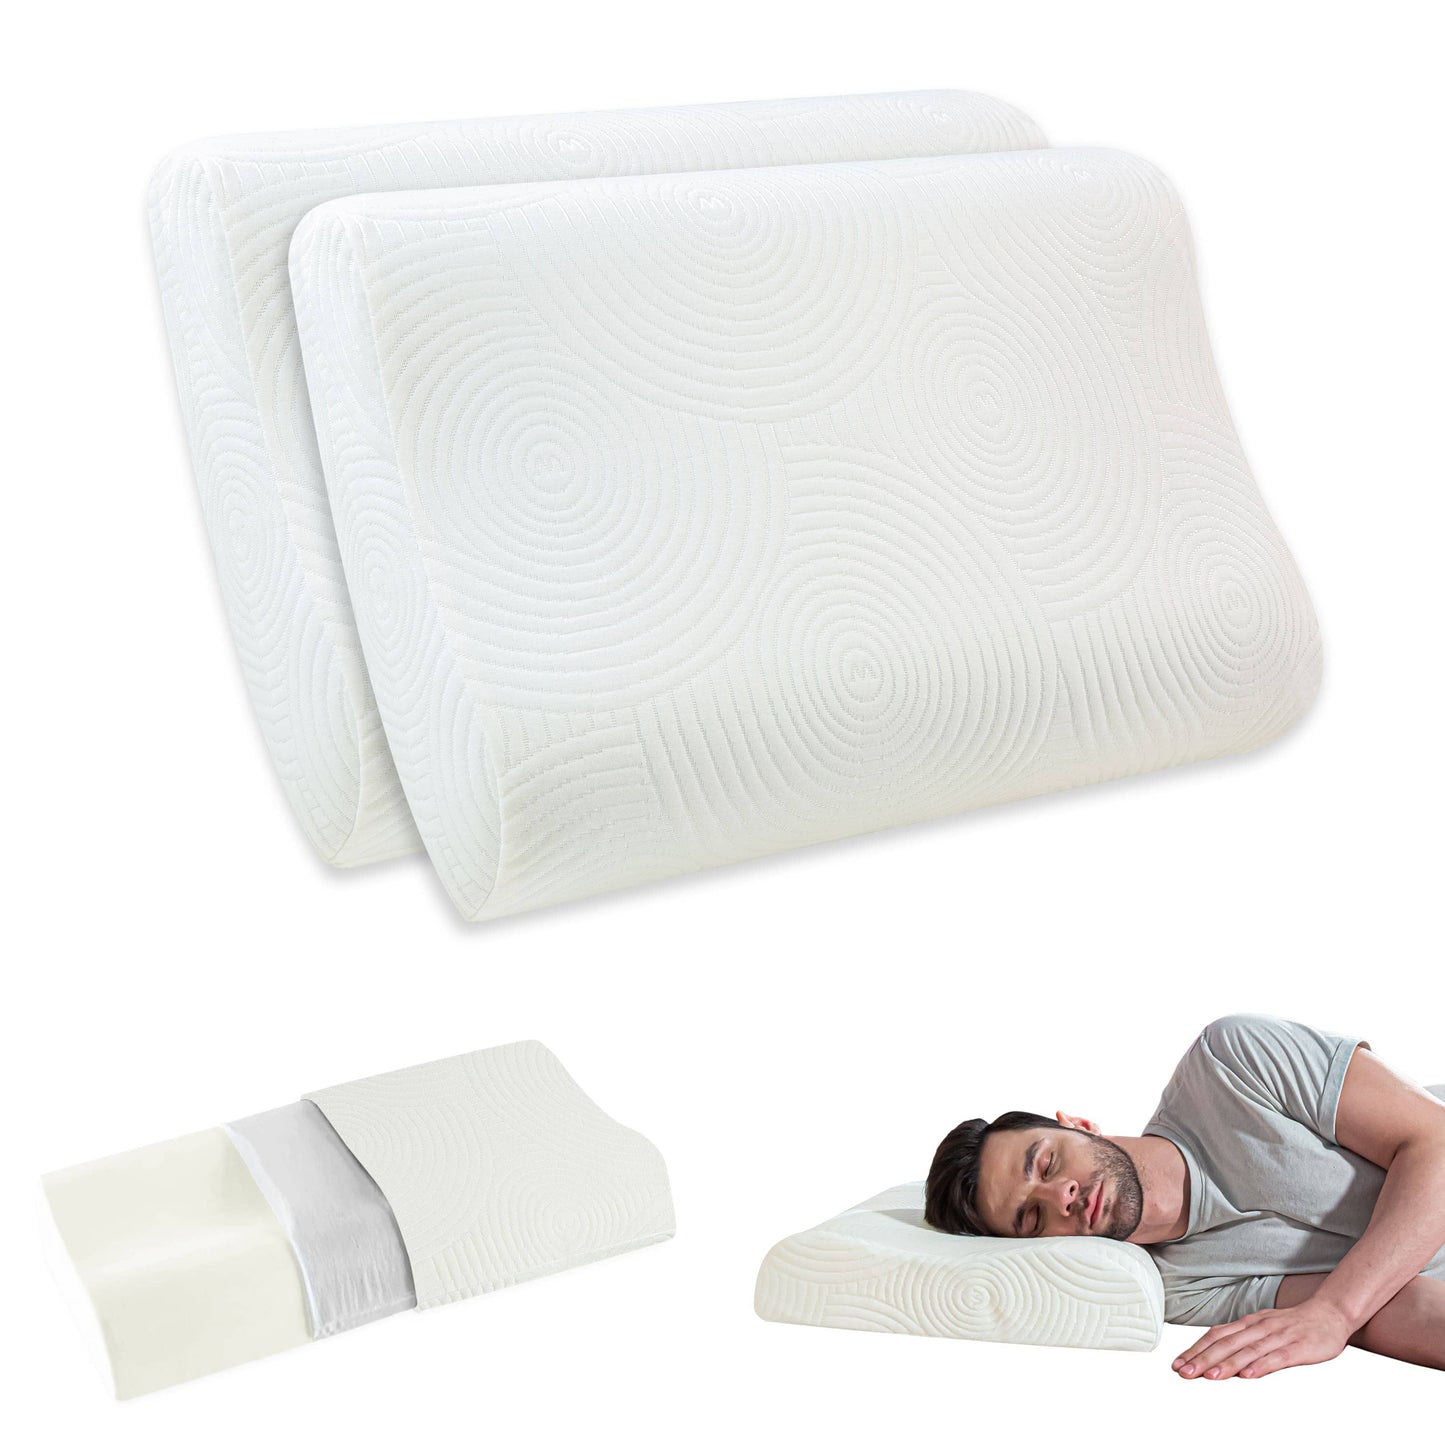 Aloe - Cooling Gel Memory Foam Cervical Pillow - Contour - Medium Firm Contour Pillow The White Willow X-Small White 2